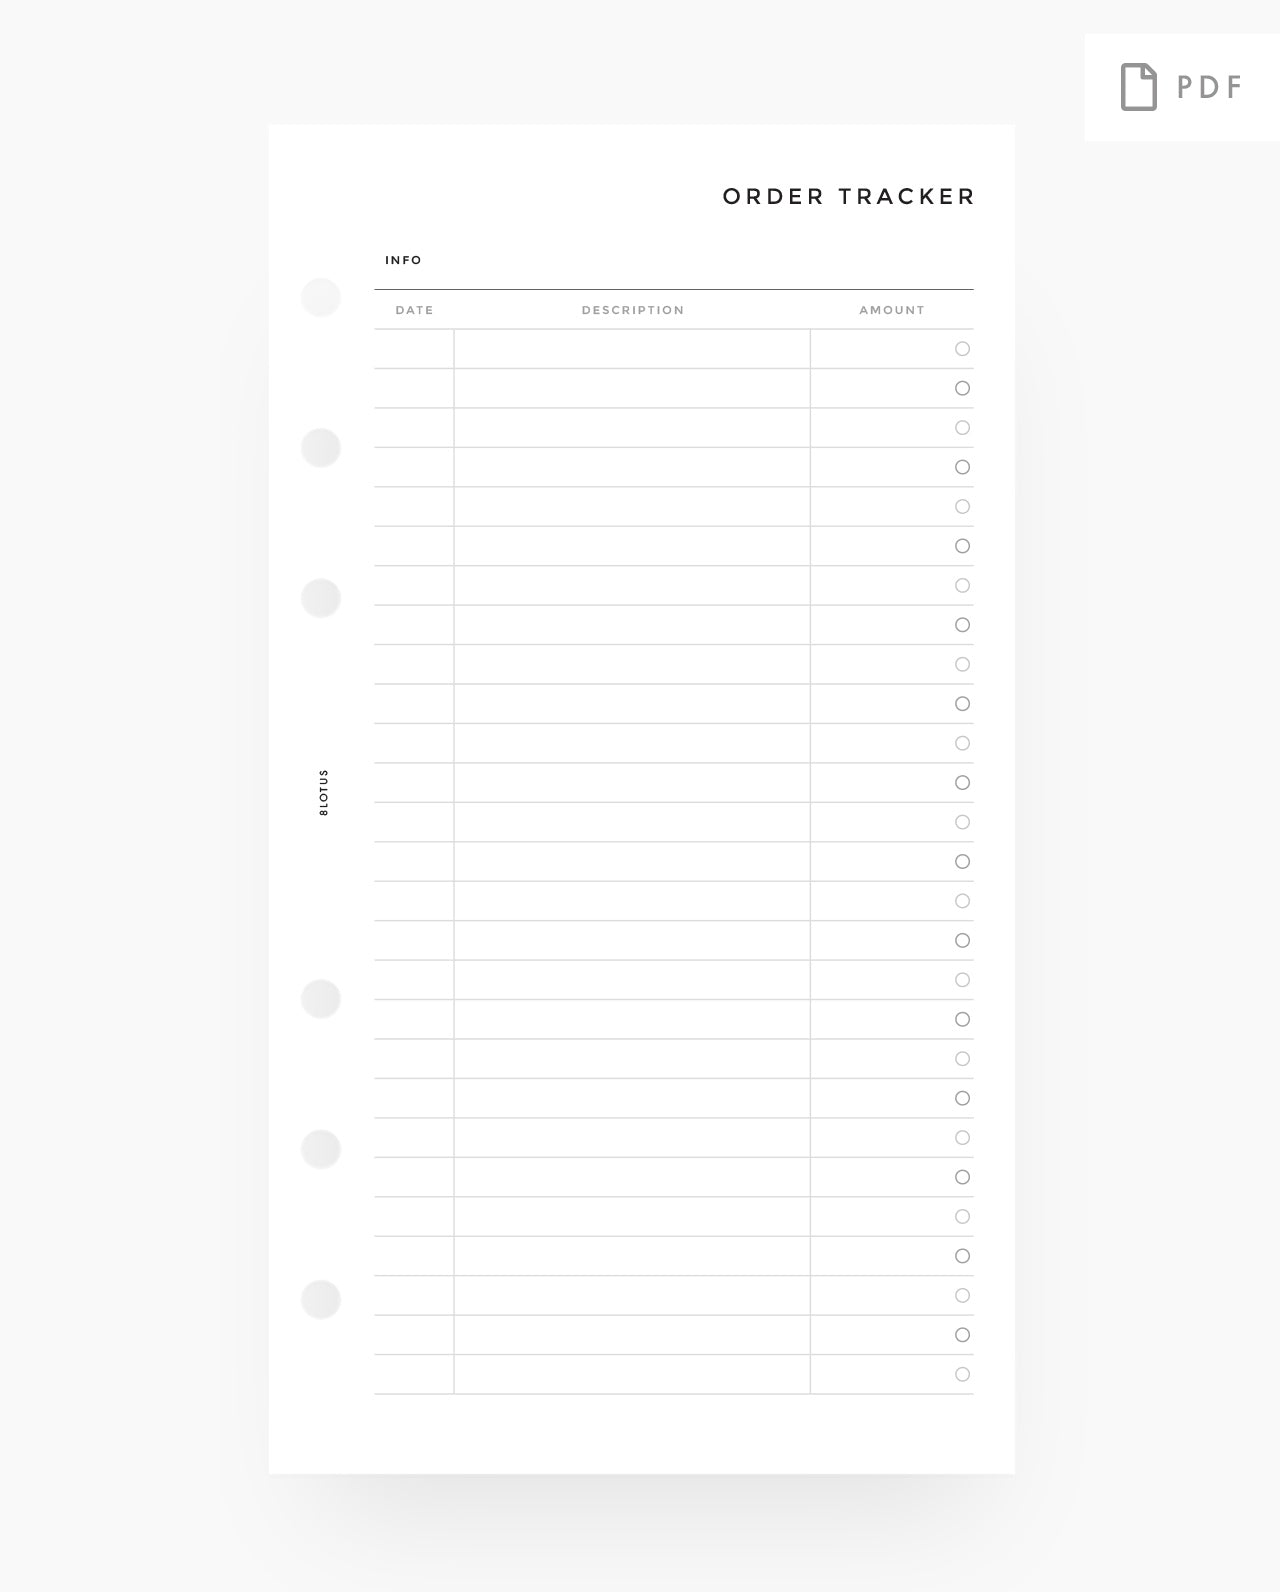 A6 Planner Inserts Purchase Tracker Printable Online Shopping List